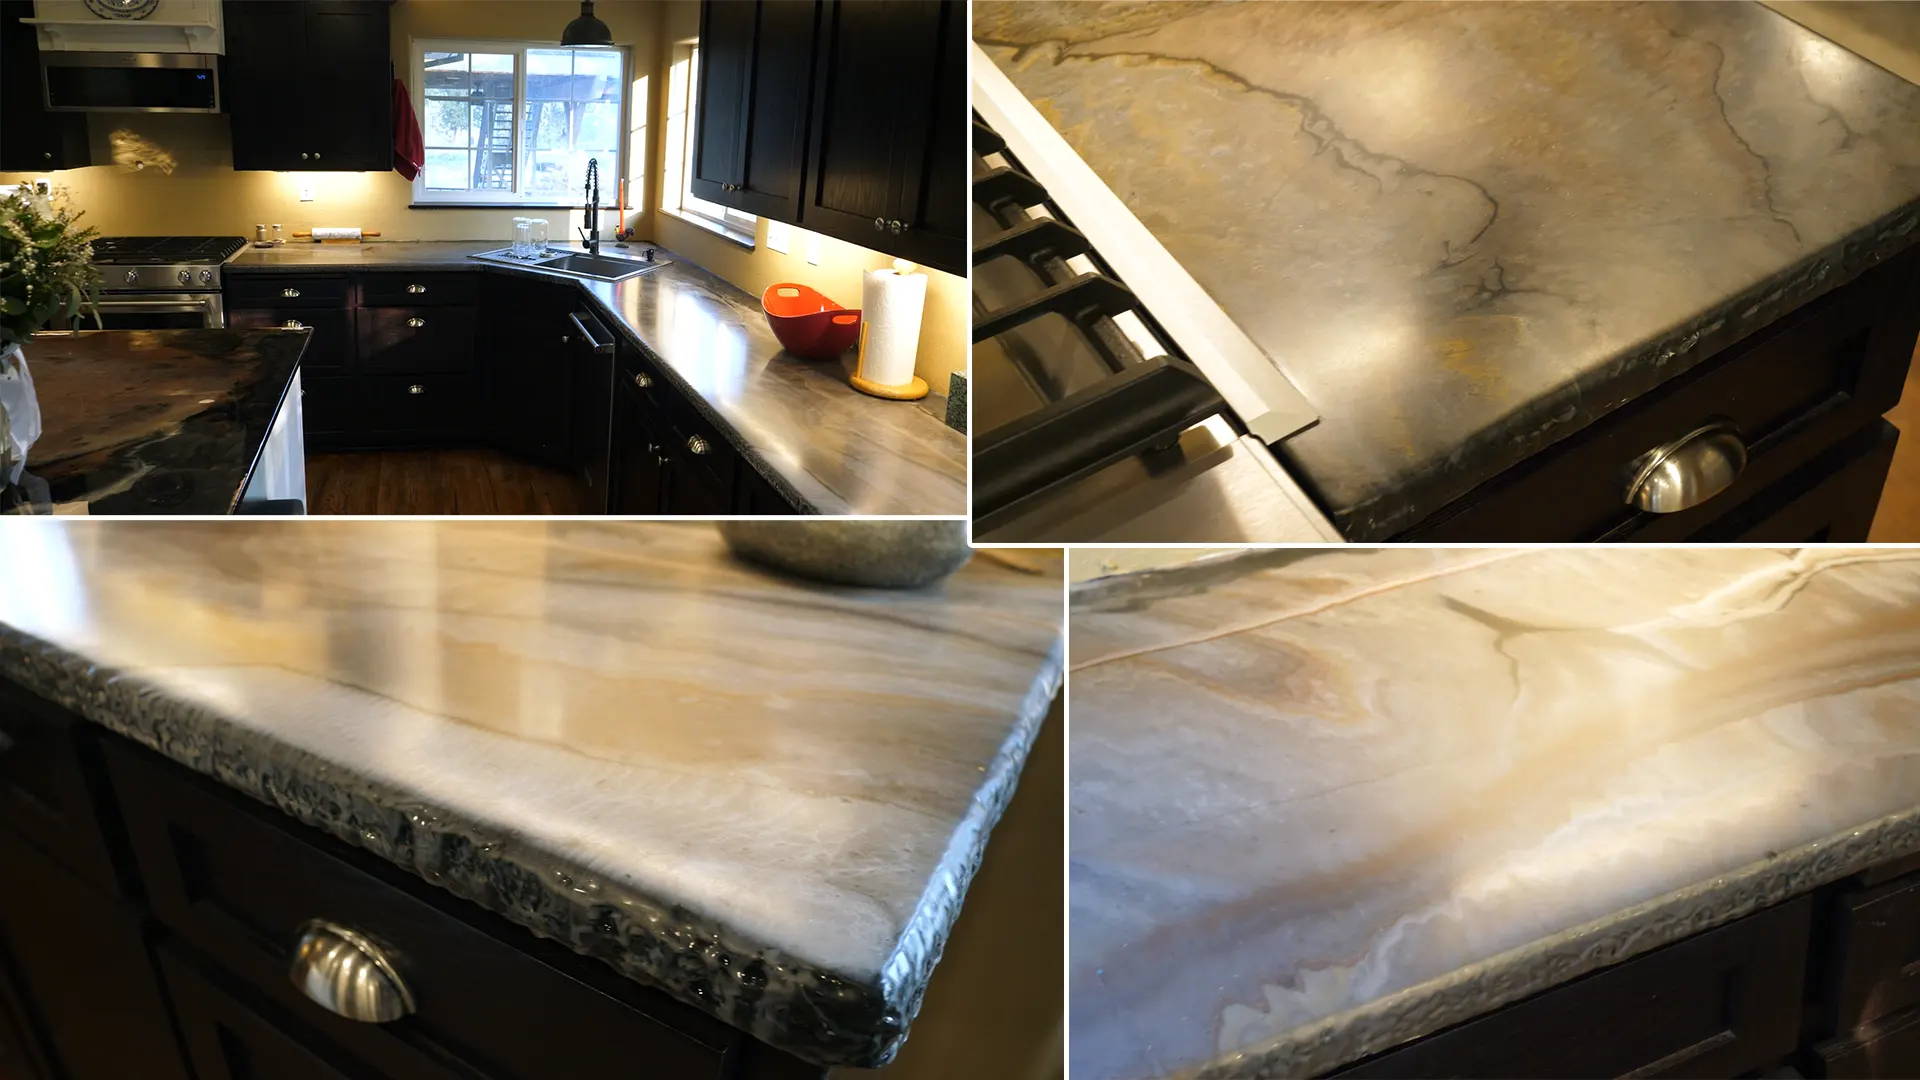 Keep them clean with non-abrasive countertop cleaners and enjoy your transformed space!